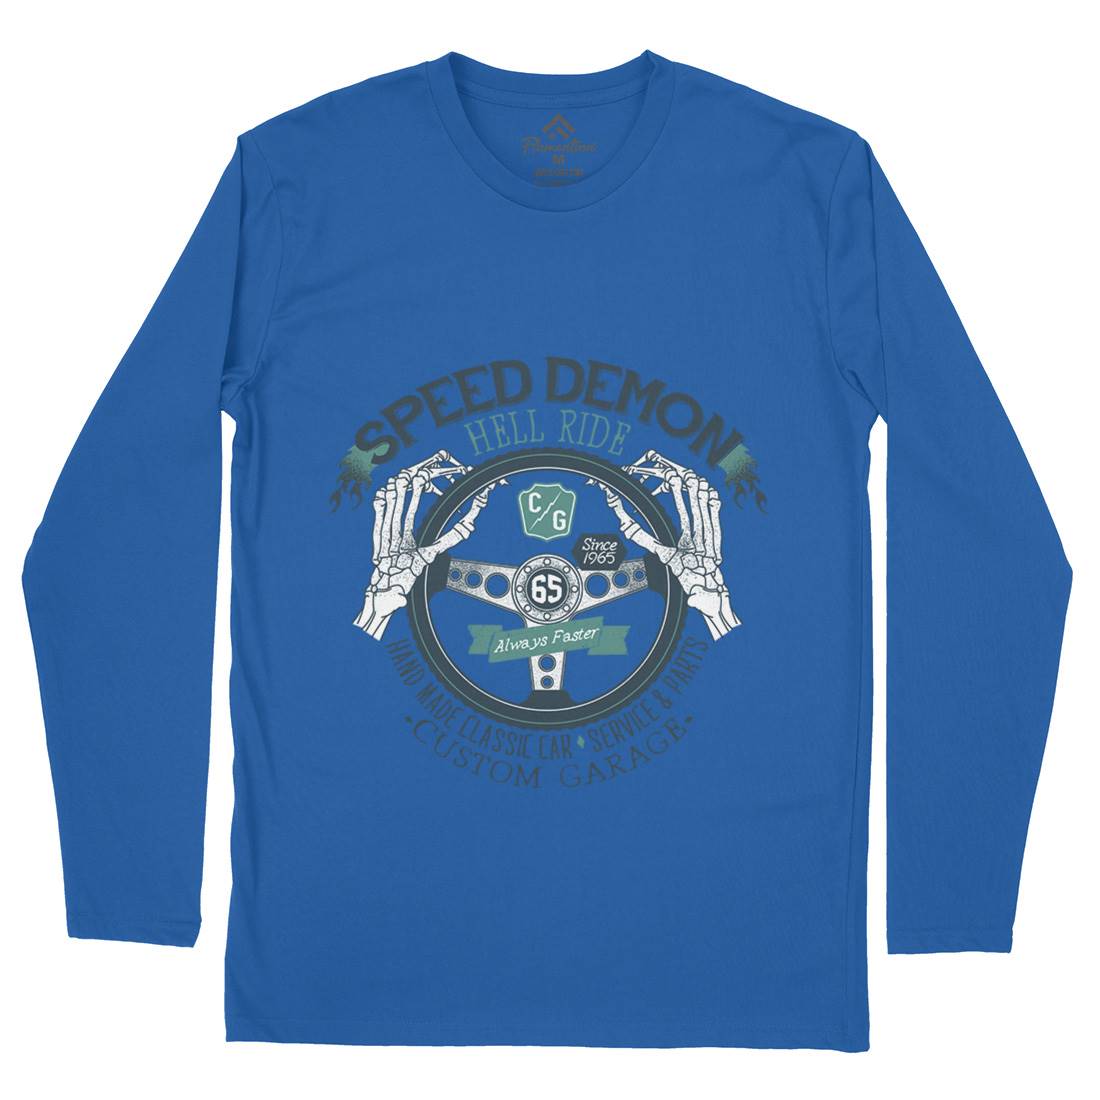 Speed Demon Mens Long Sleeve T-Shirt Motorcycles A987